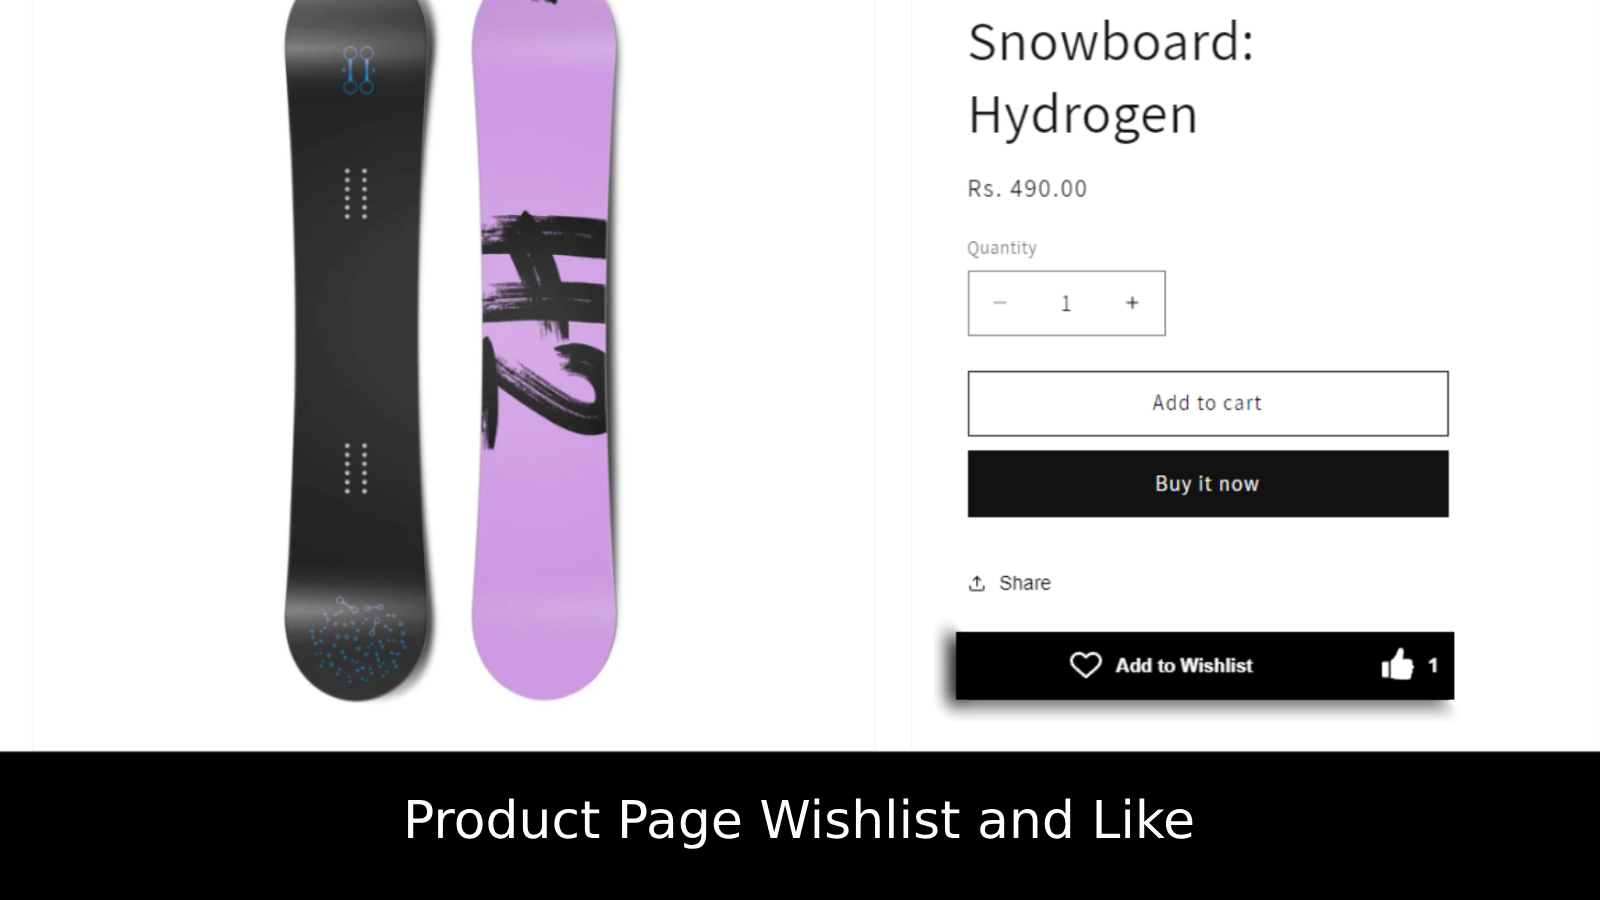 Super wishlist product page